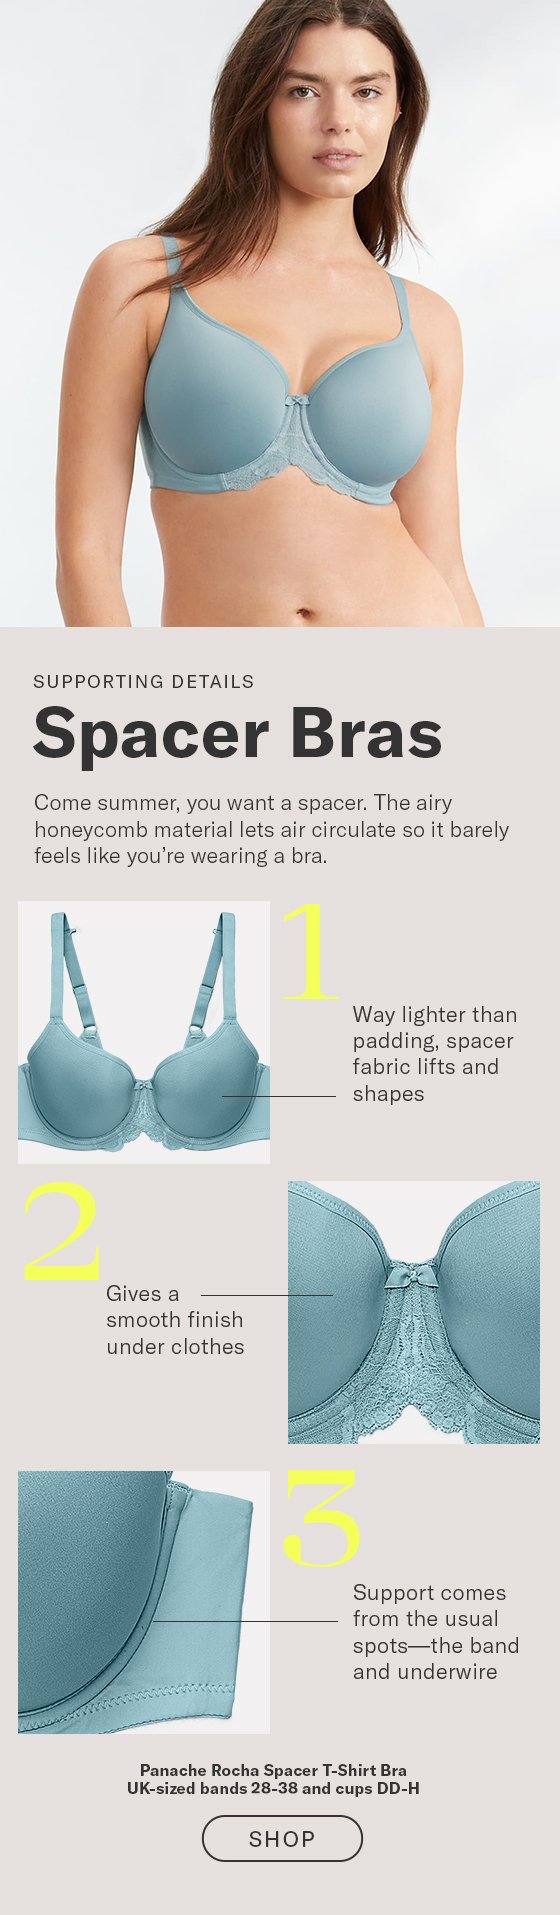 Breathable & Lightweight: Discover Spacer Bras - Bare Necessities